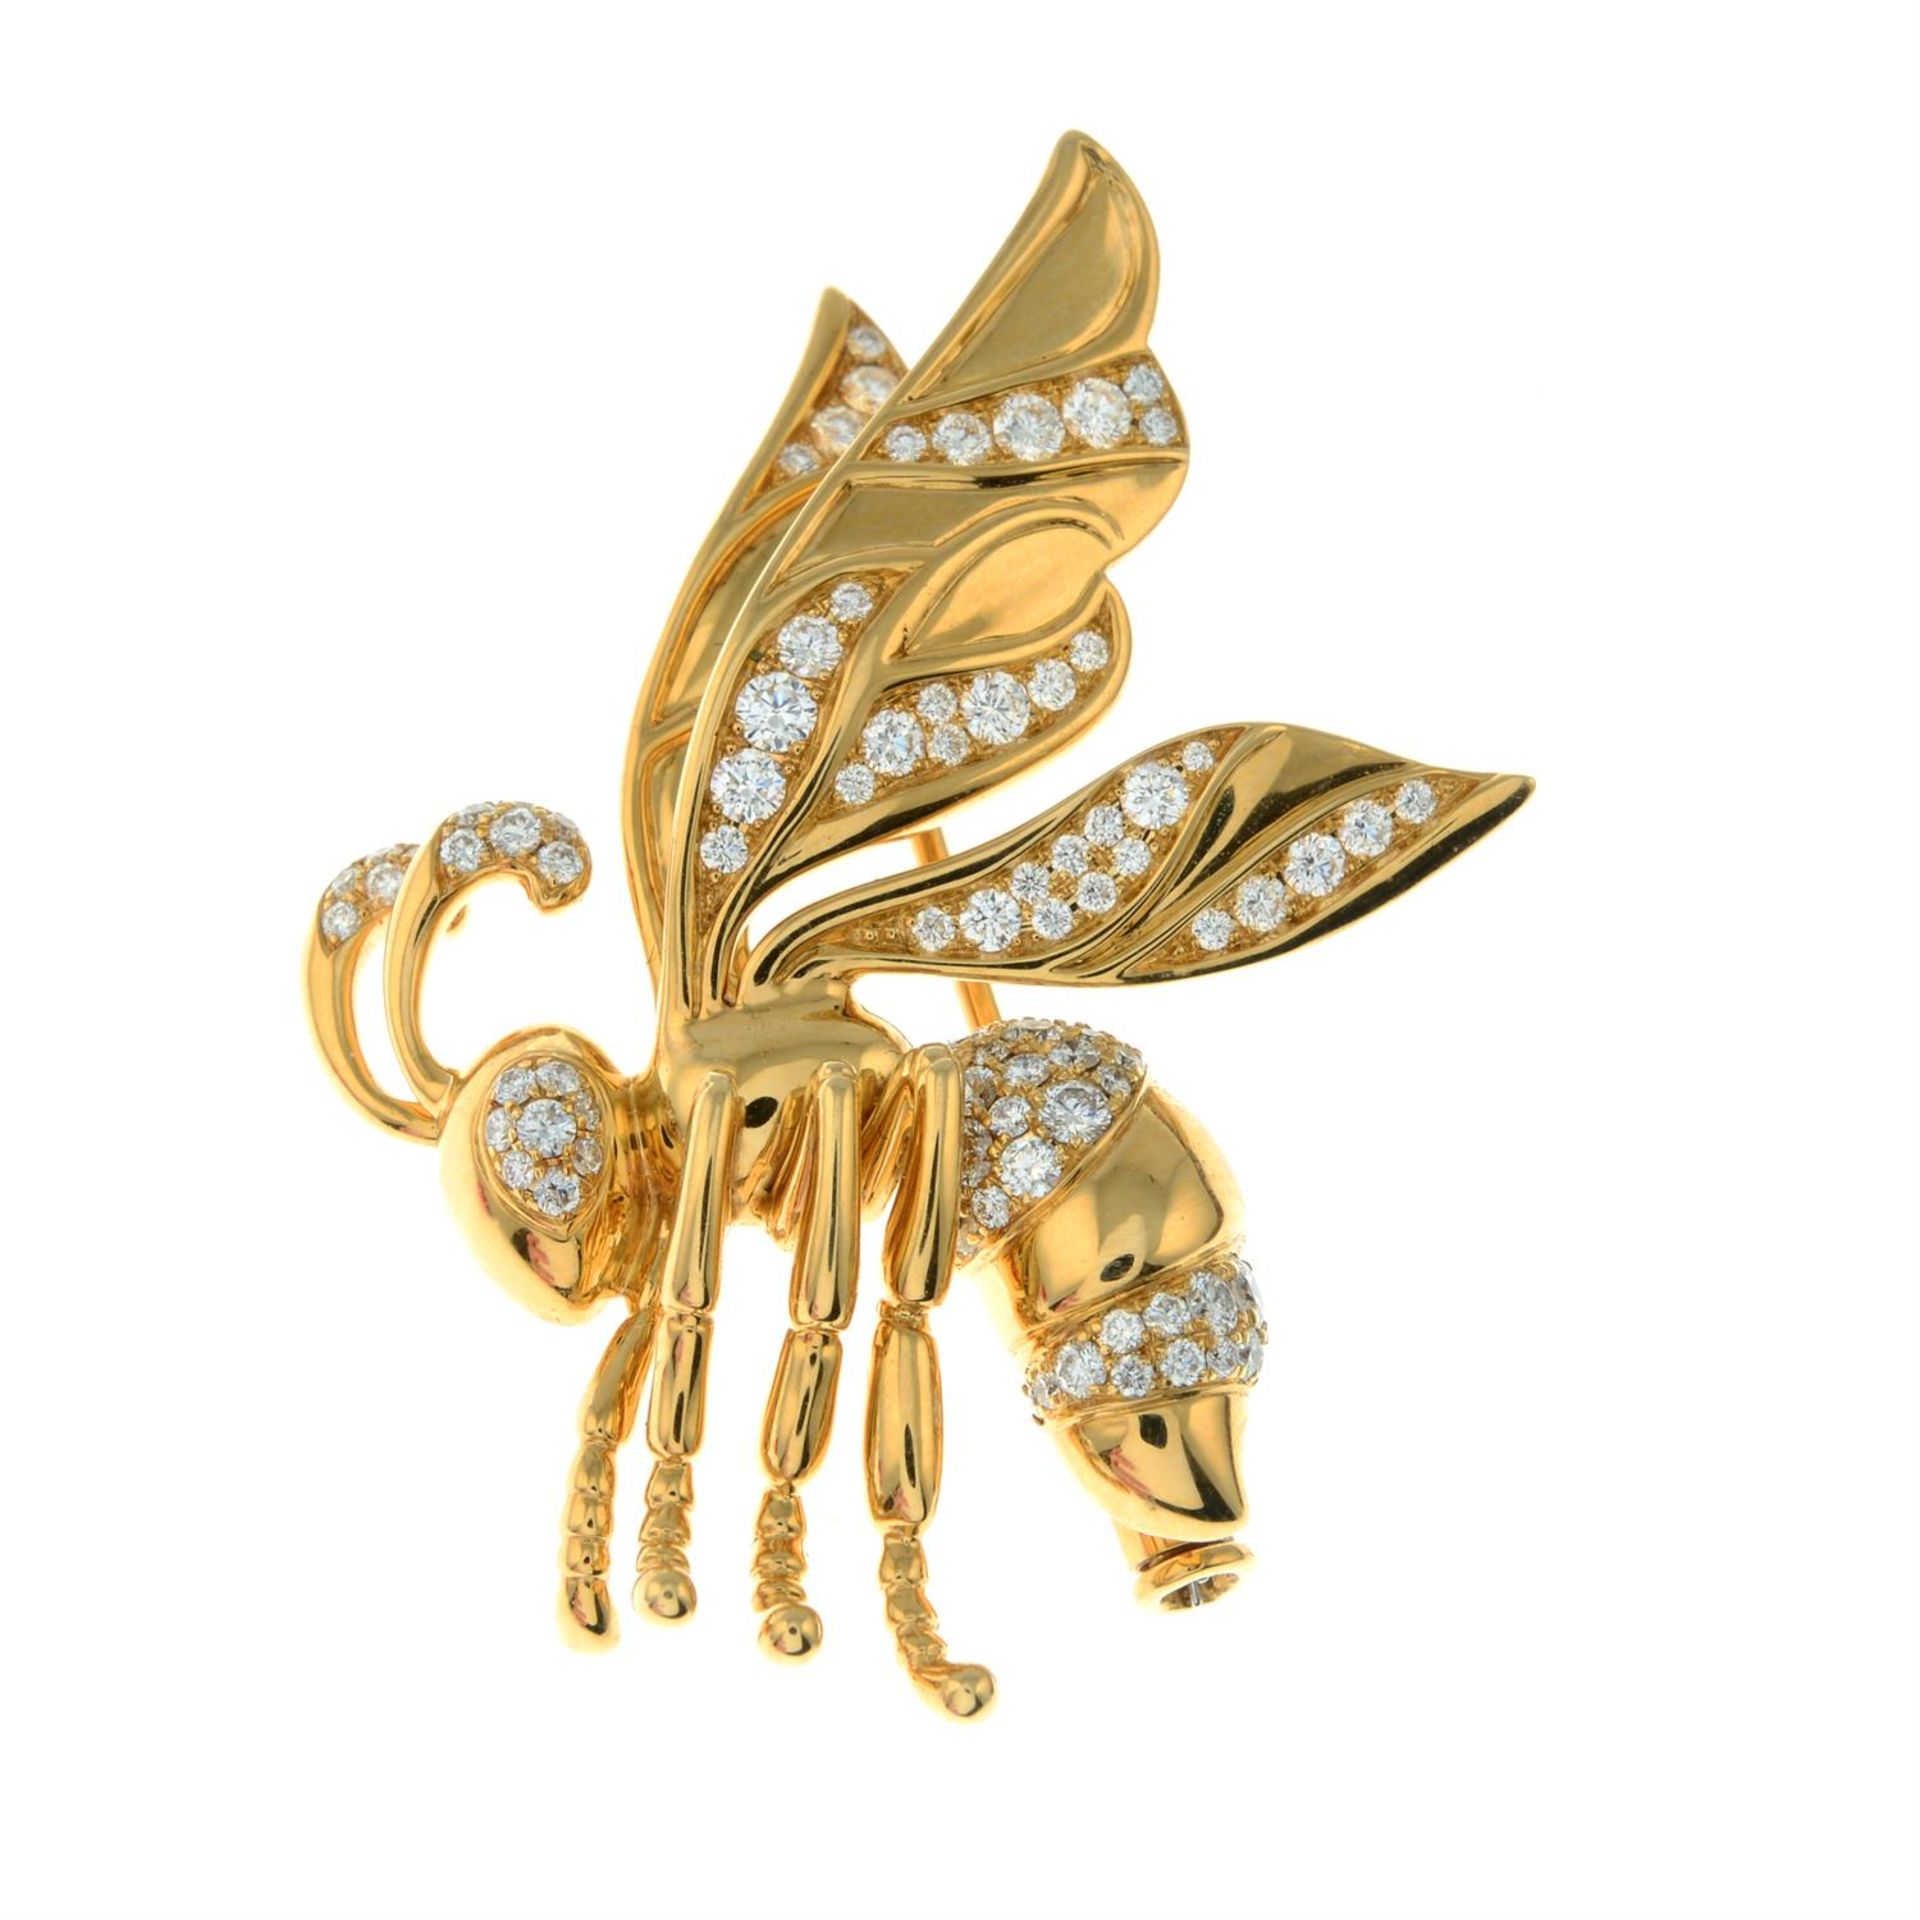 An 18ct gold pavé-set diamond wasp brooch, by Kat Florence. - Image 2 of 4